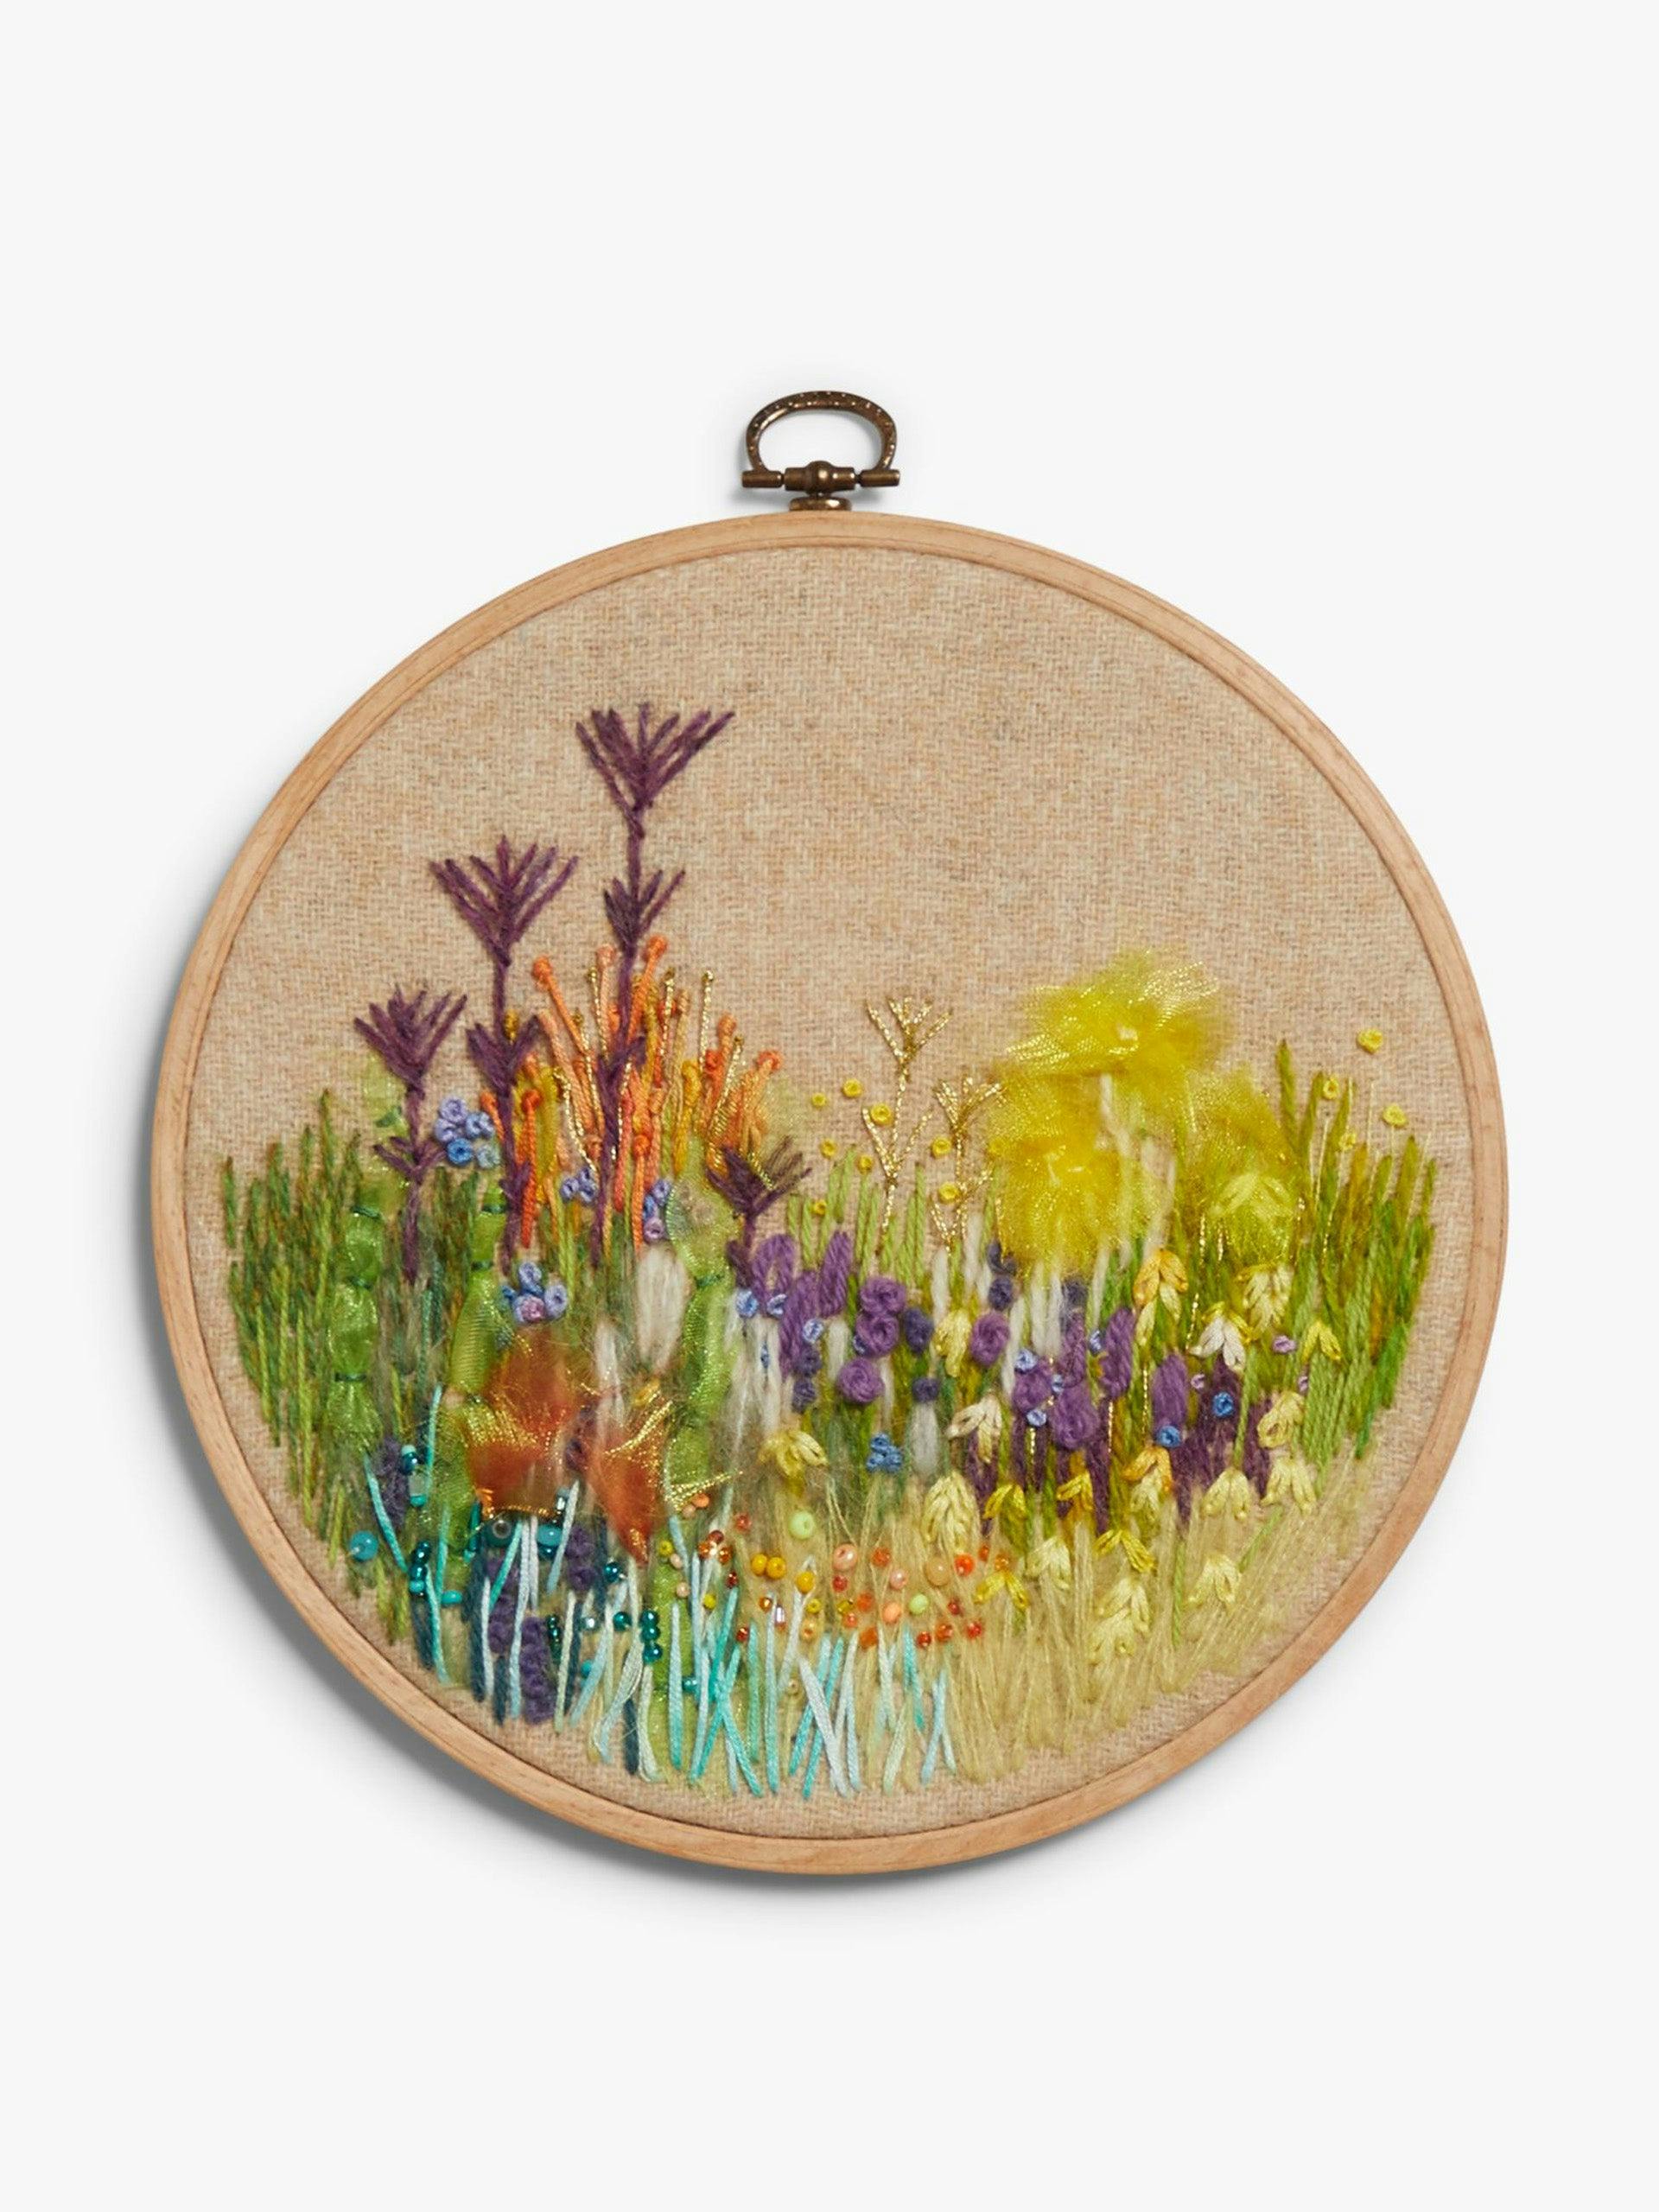 Cowslip Meadow embroidery kit